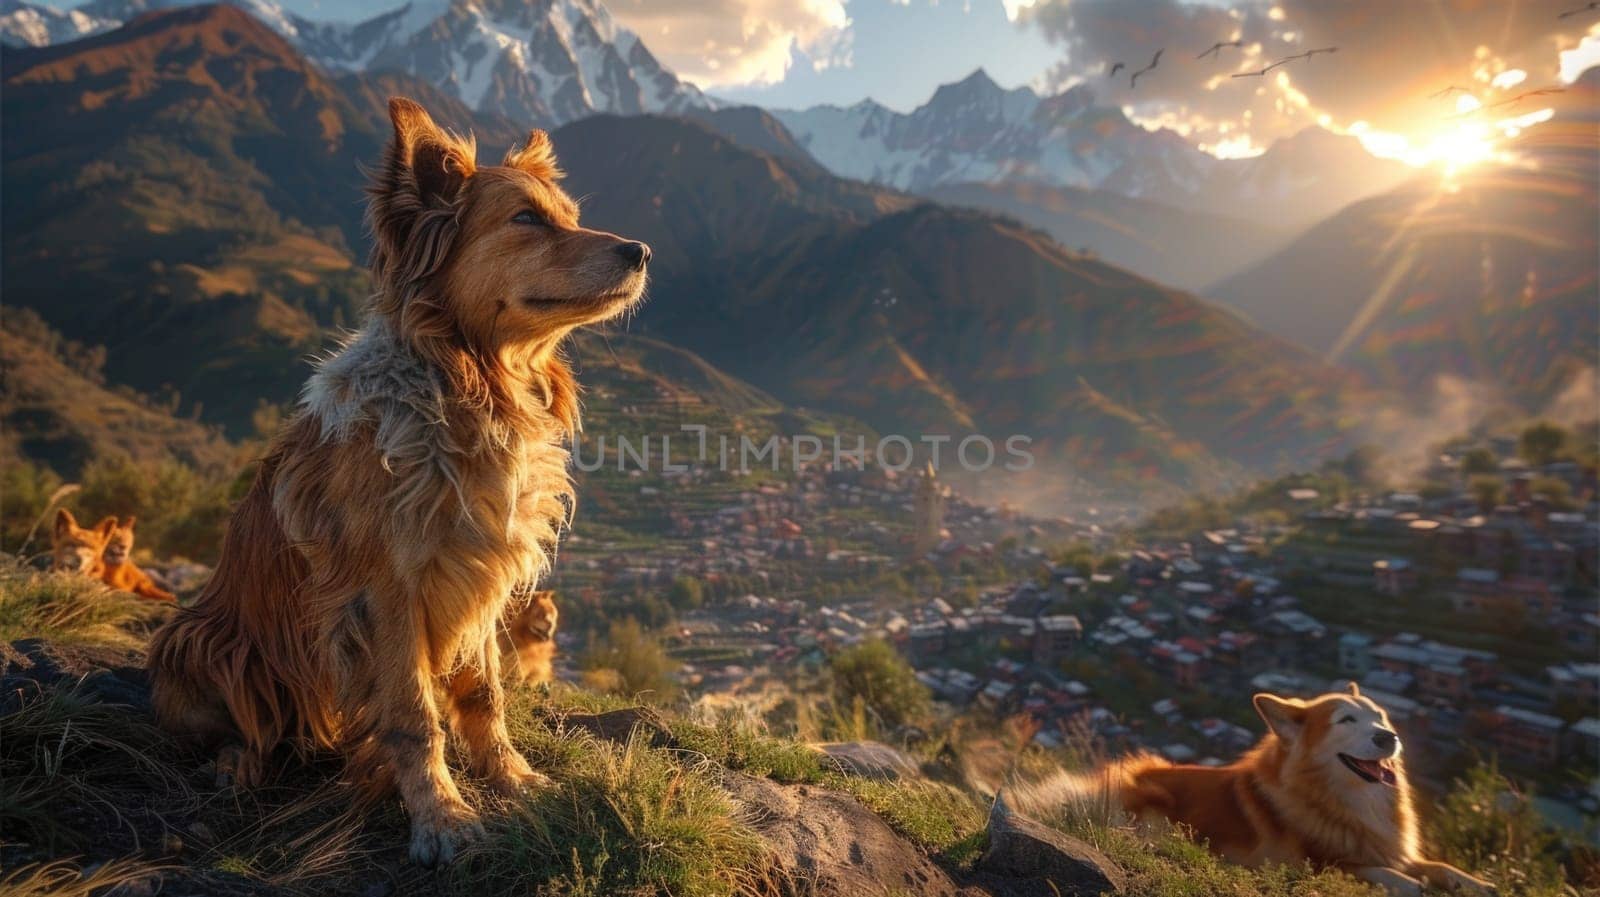 Dog and Cat Sitting on Hill by but_photo